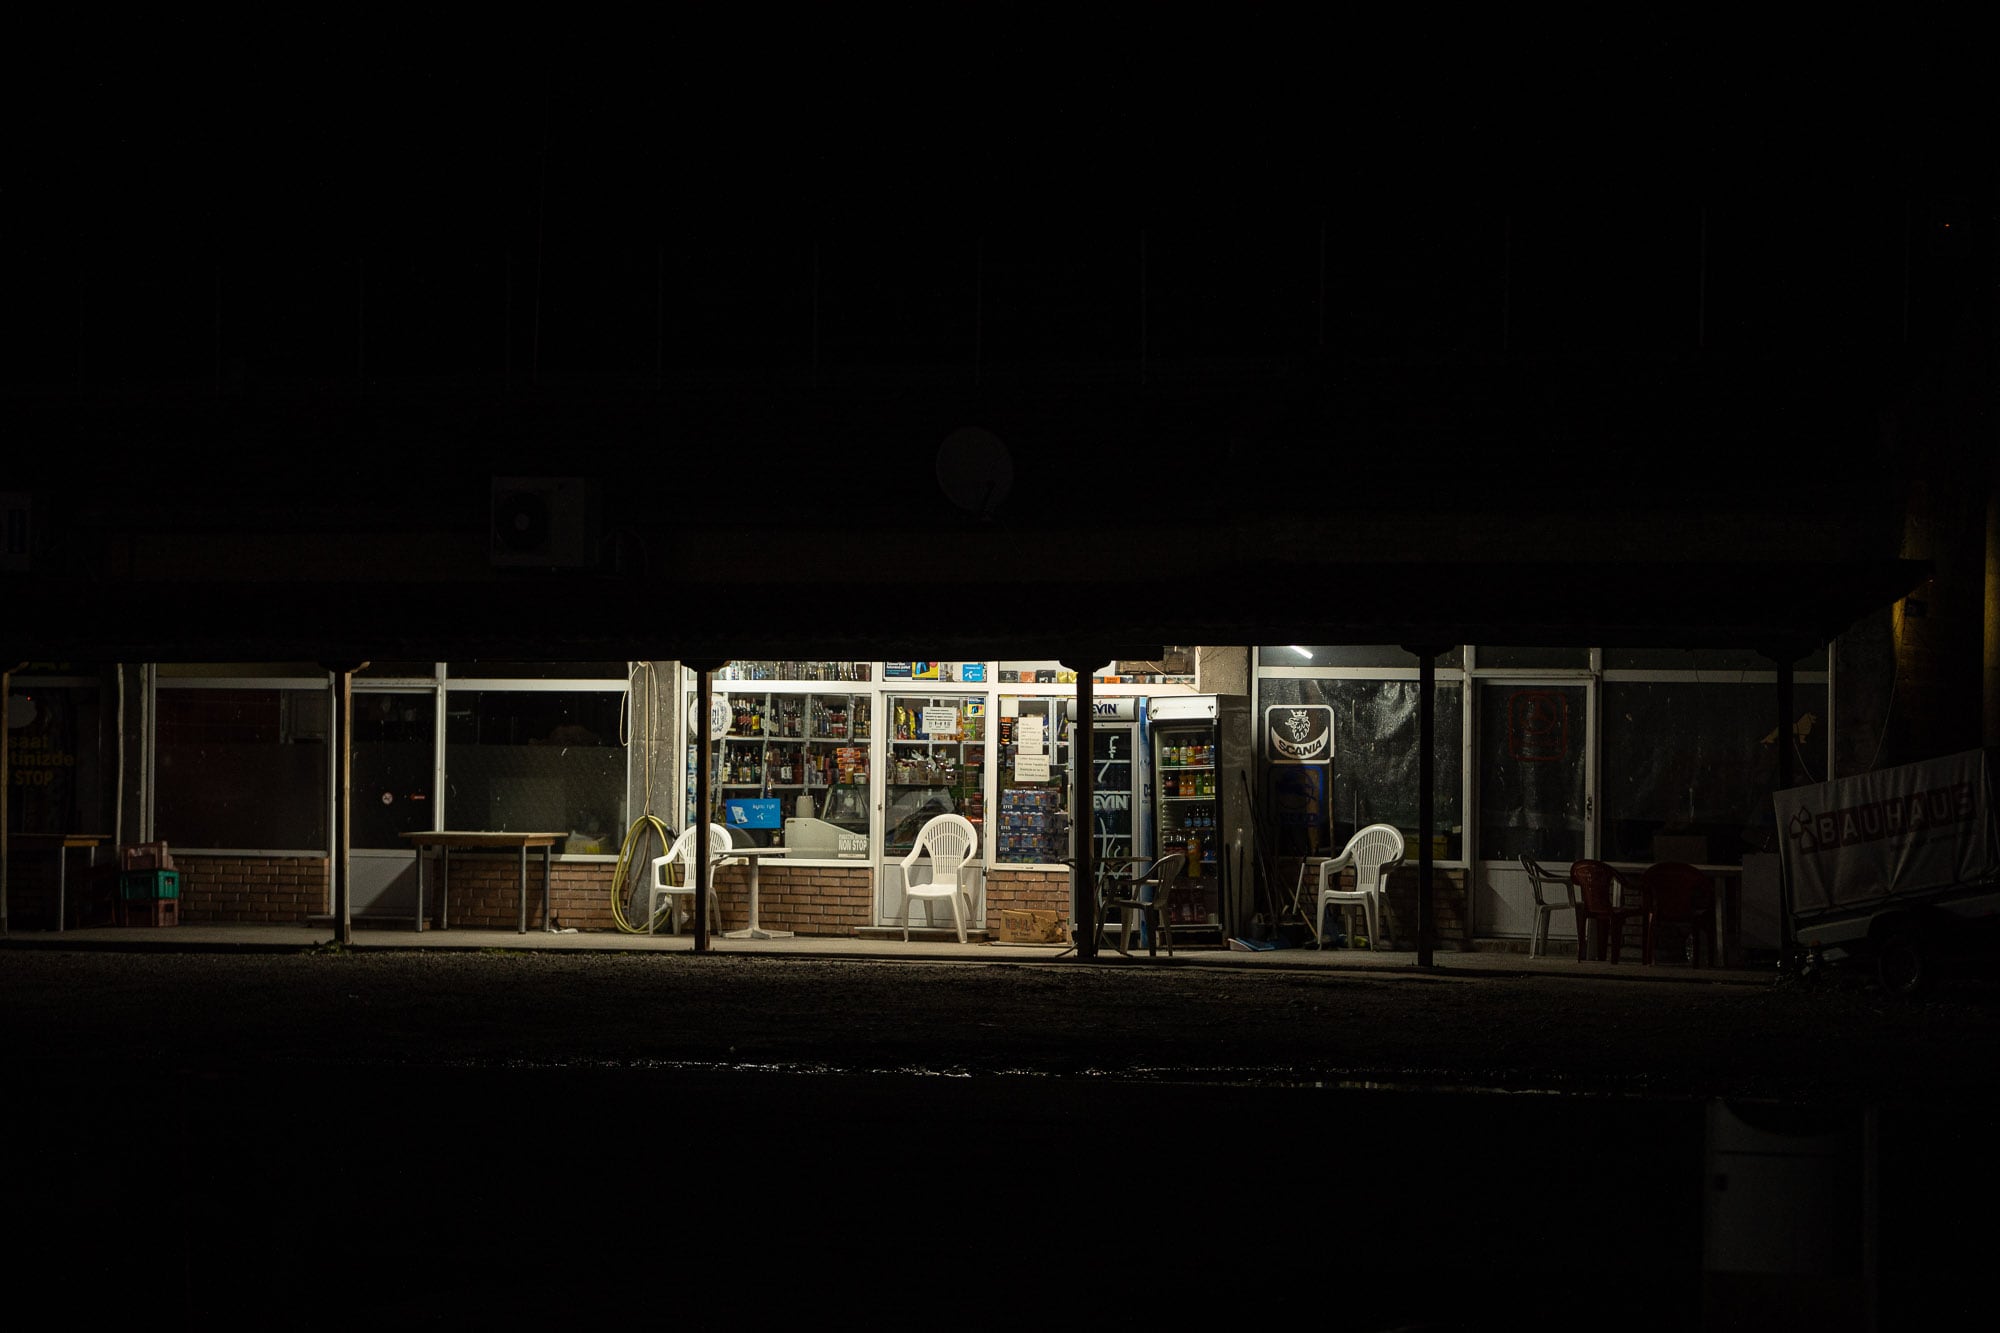 small shop near the Kapıkule border, on the way from Edirne to Svilengrad